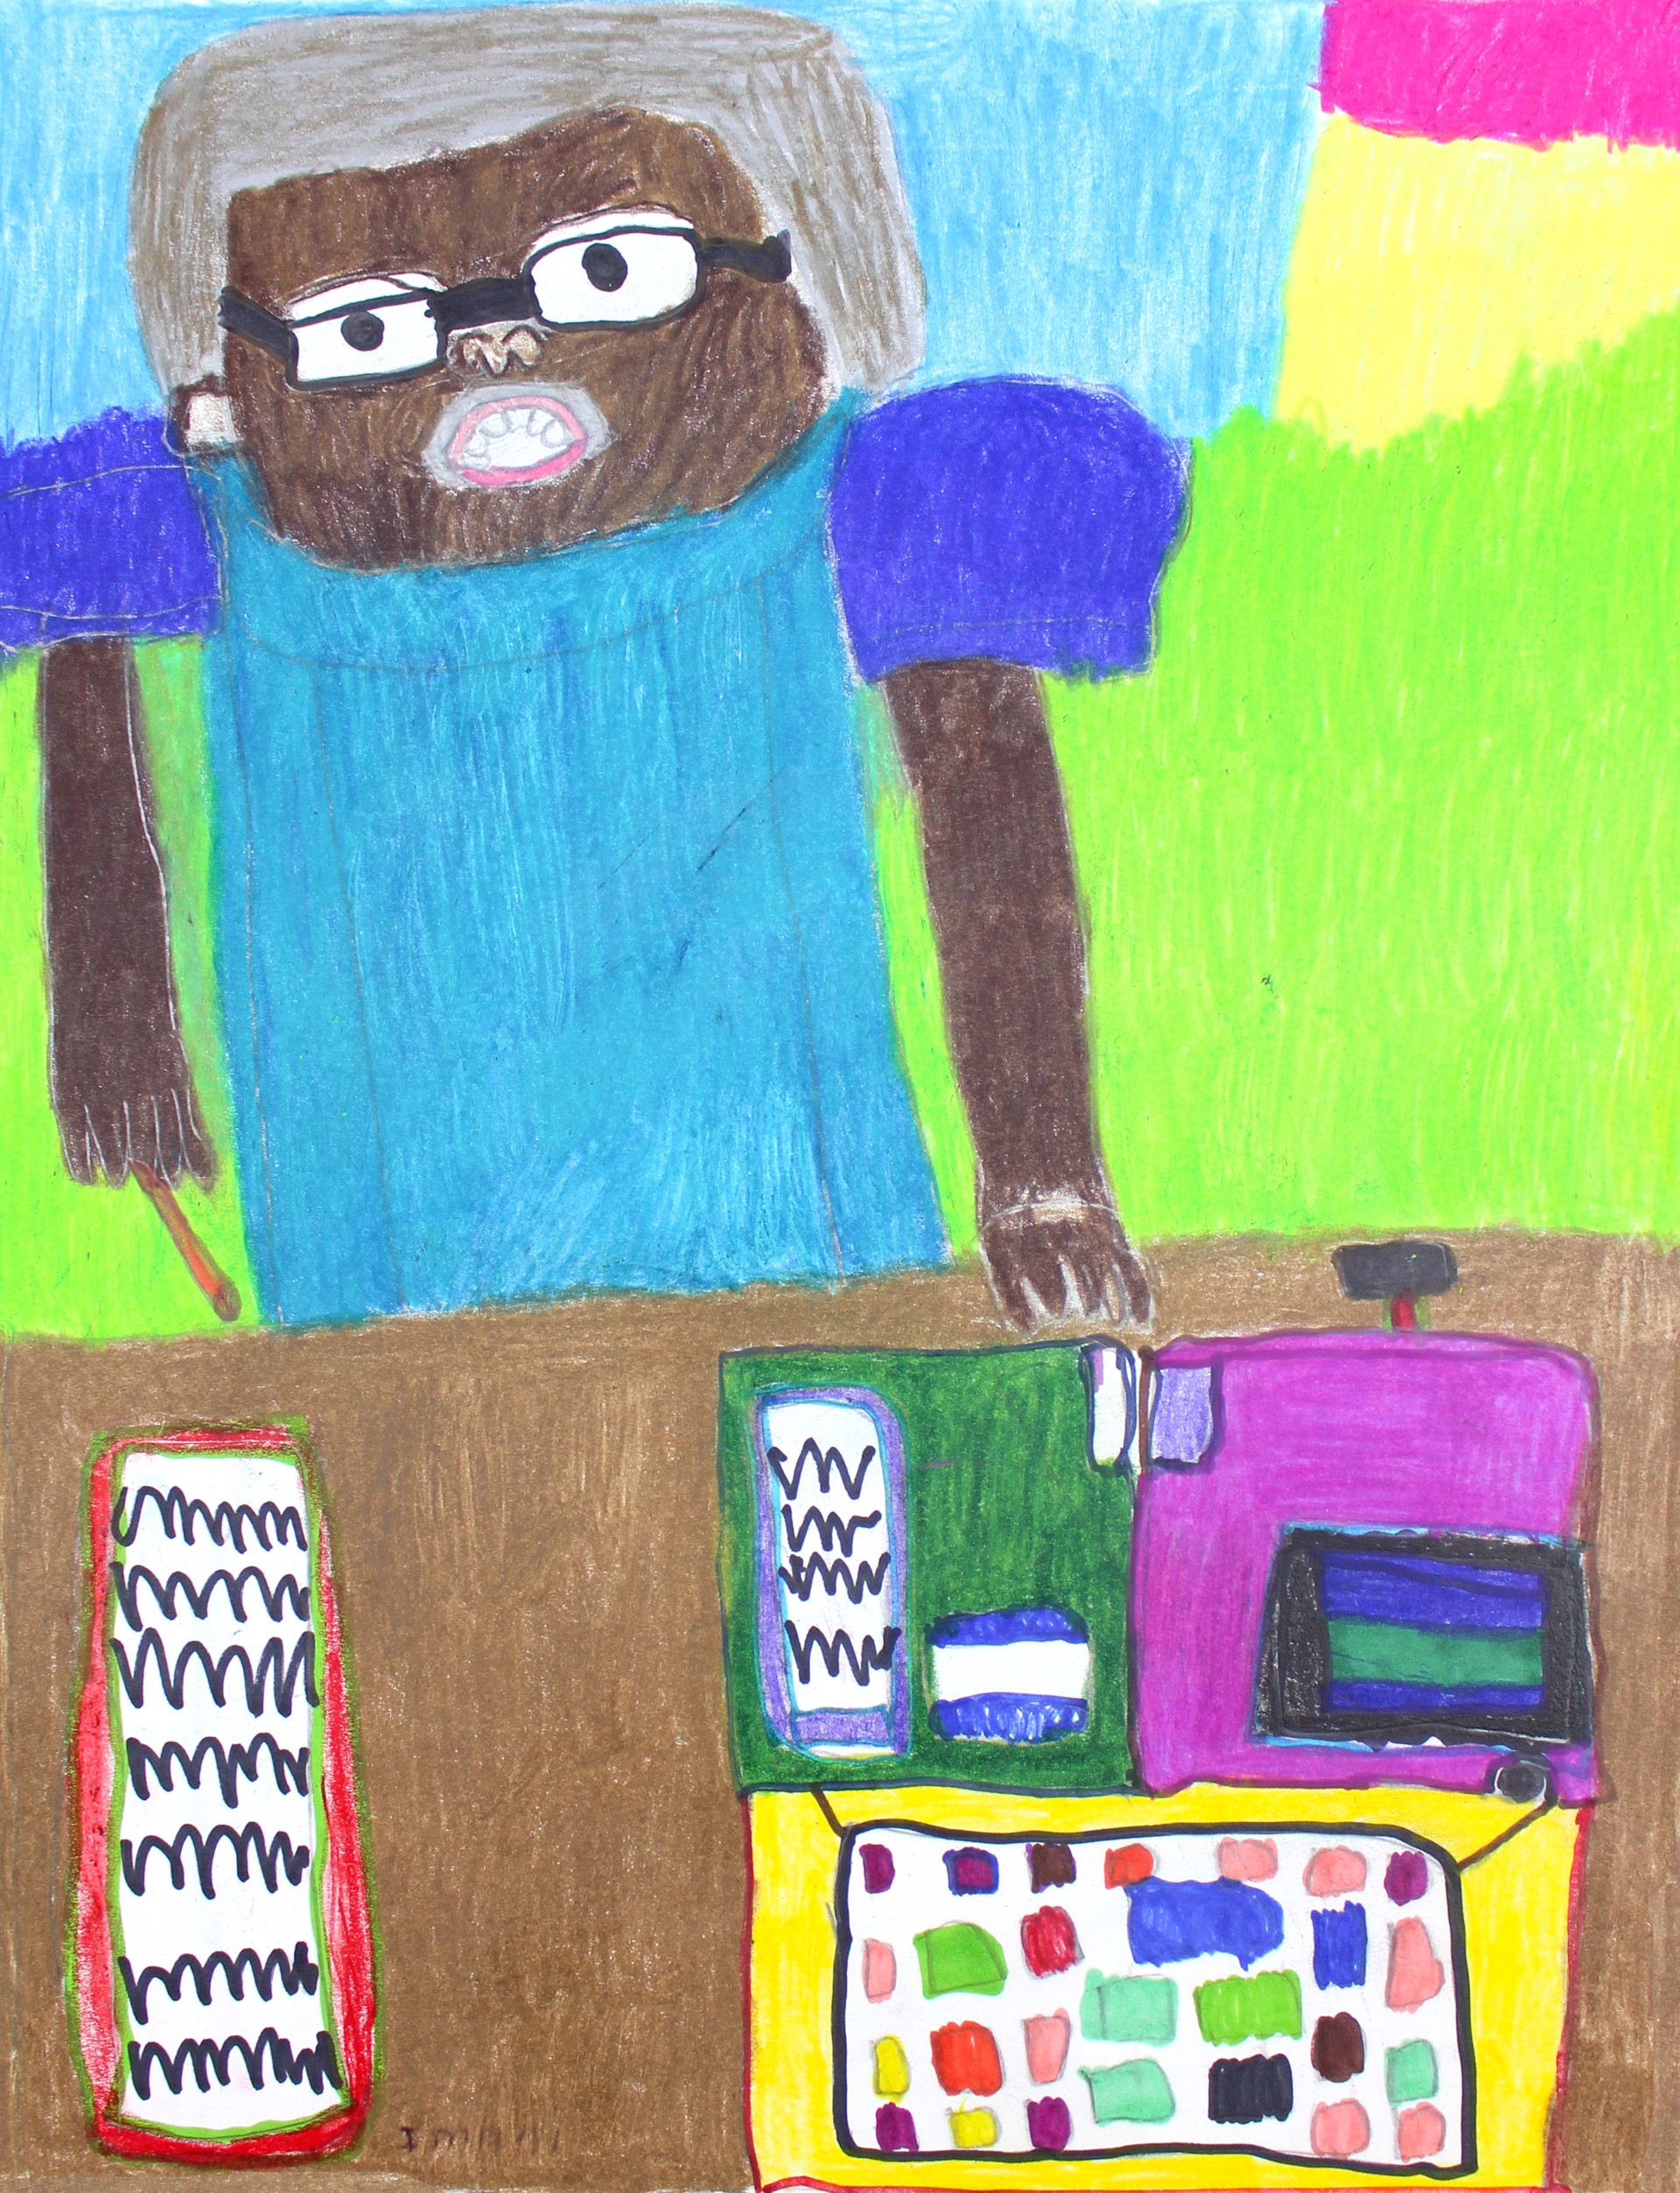 Carl the Cashier by Imani Turner